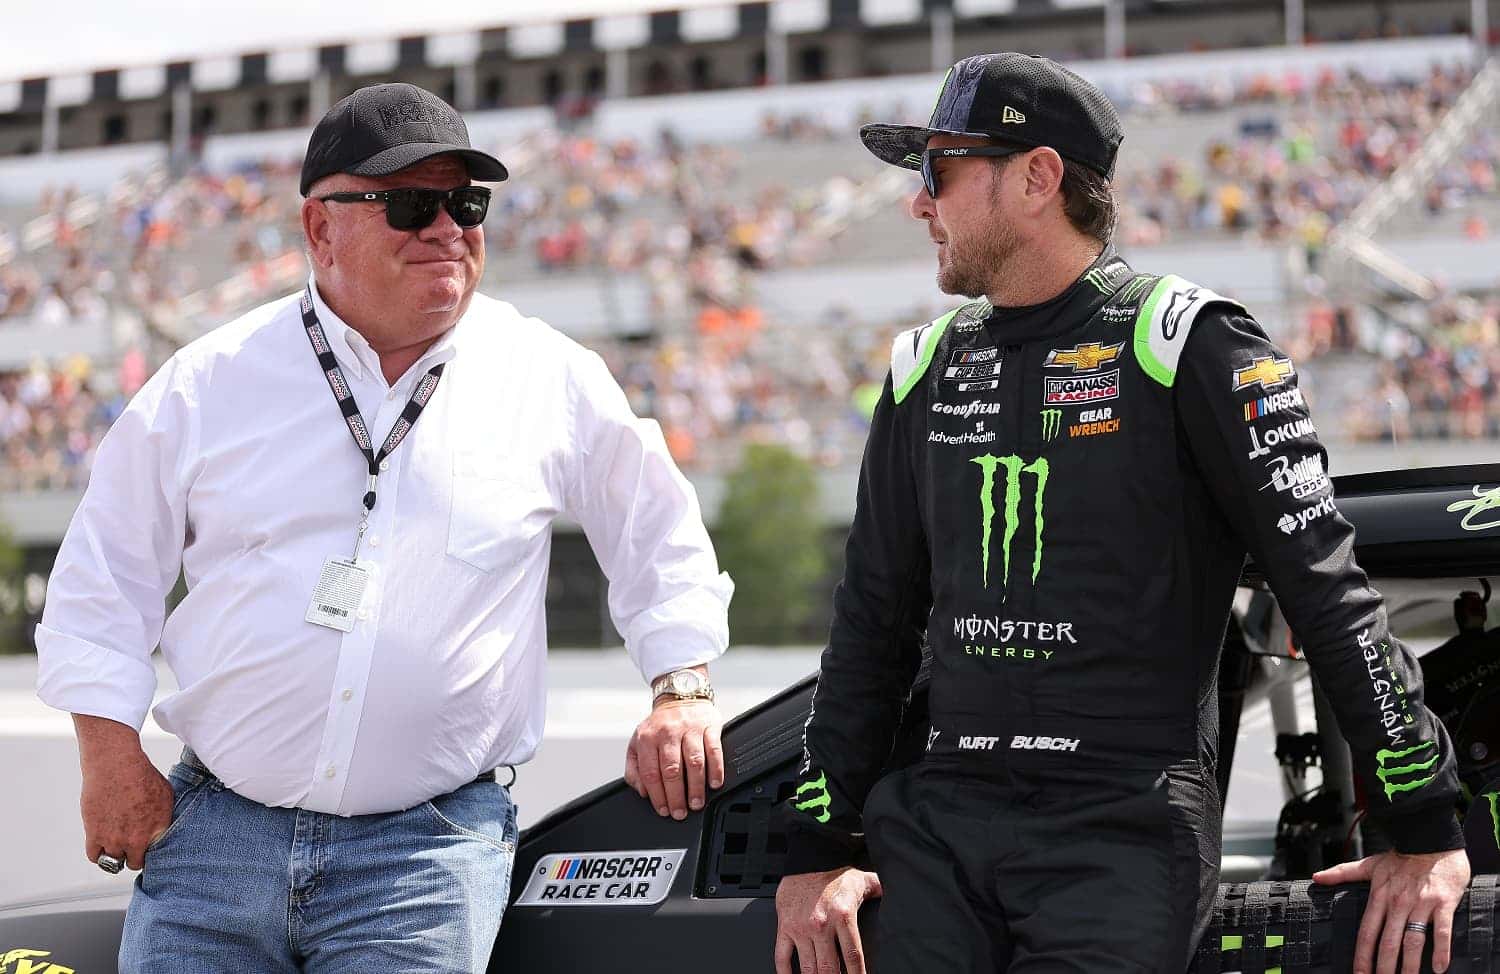 Driver Kurt Busch and team owner Chip Ganassi talk on the grid prior to the NASCAR Cup Series Pocono Organics CBD 325 at Pocono Raceway on June 26, 2021. | James Gilbert/Getty Images